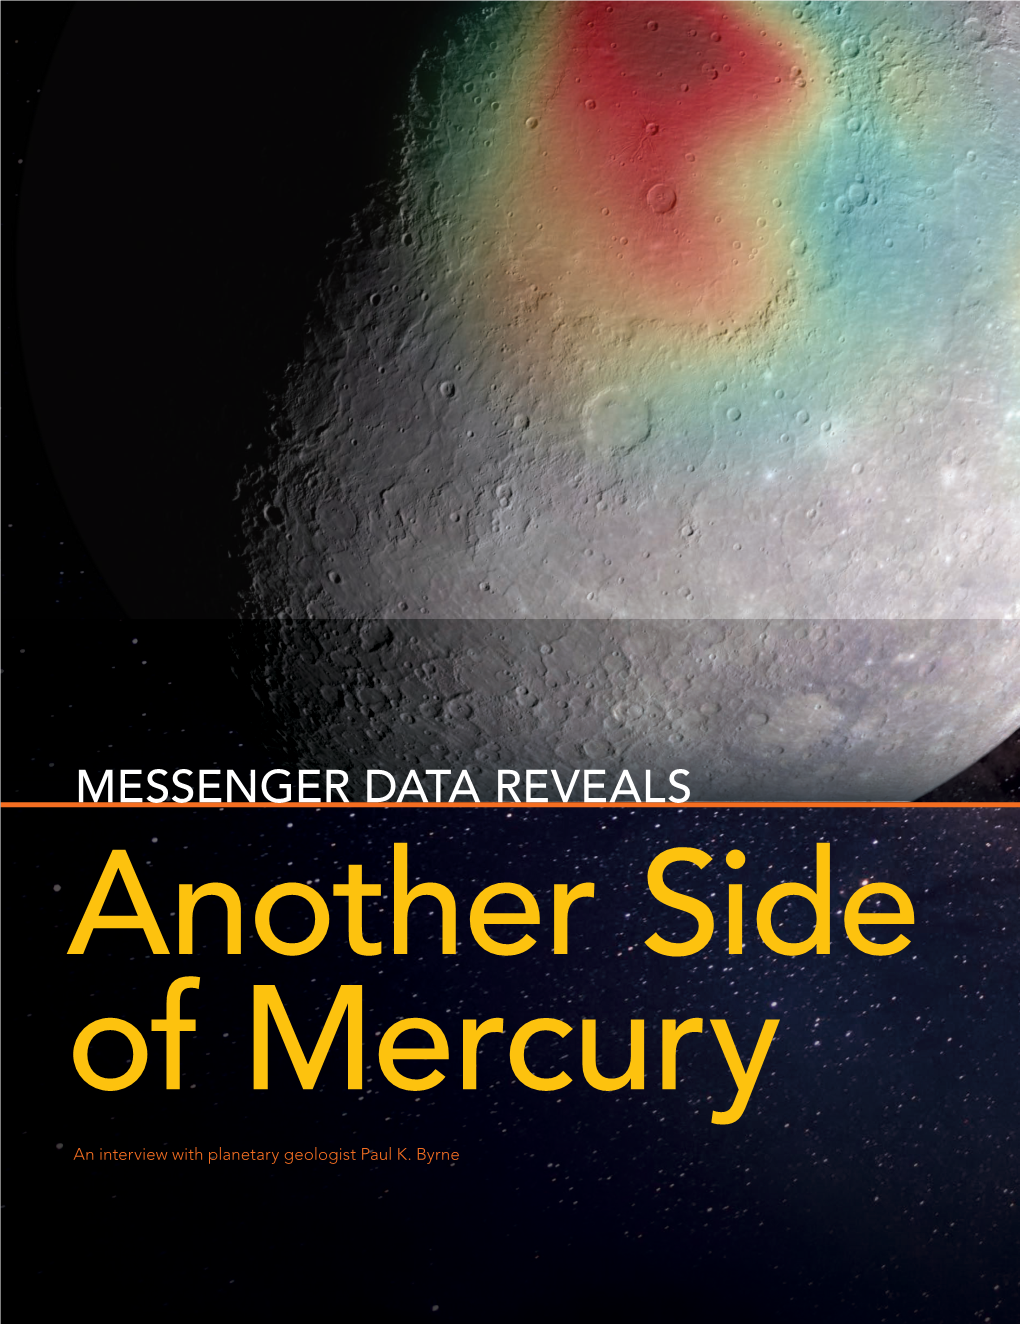 MESSENGER DATA REVEALS Another Side of Mercury an Interview with Planetary Geologist Paul K